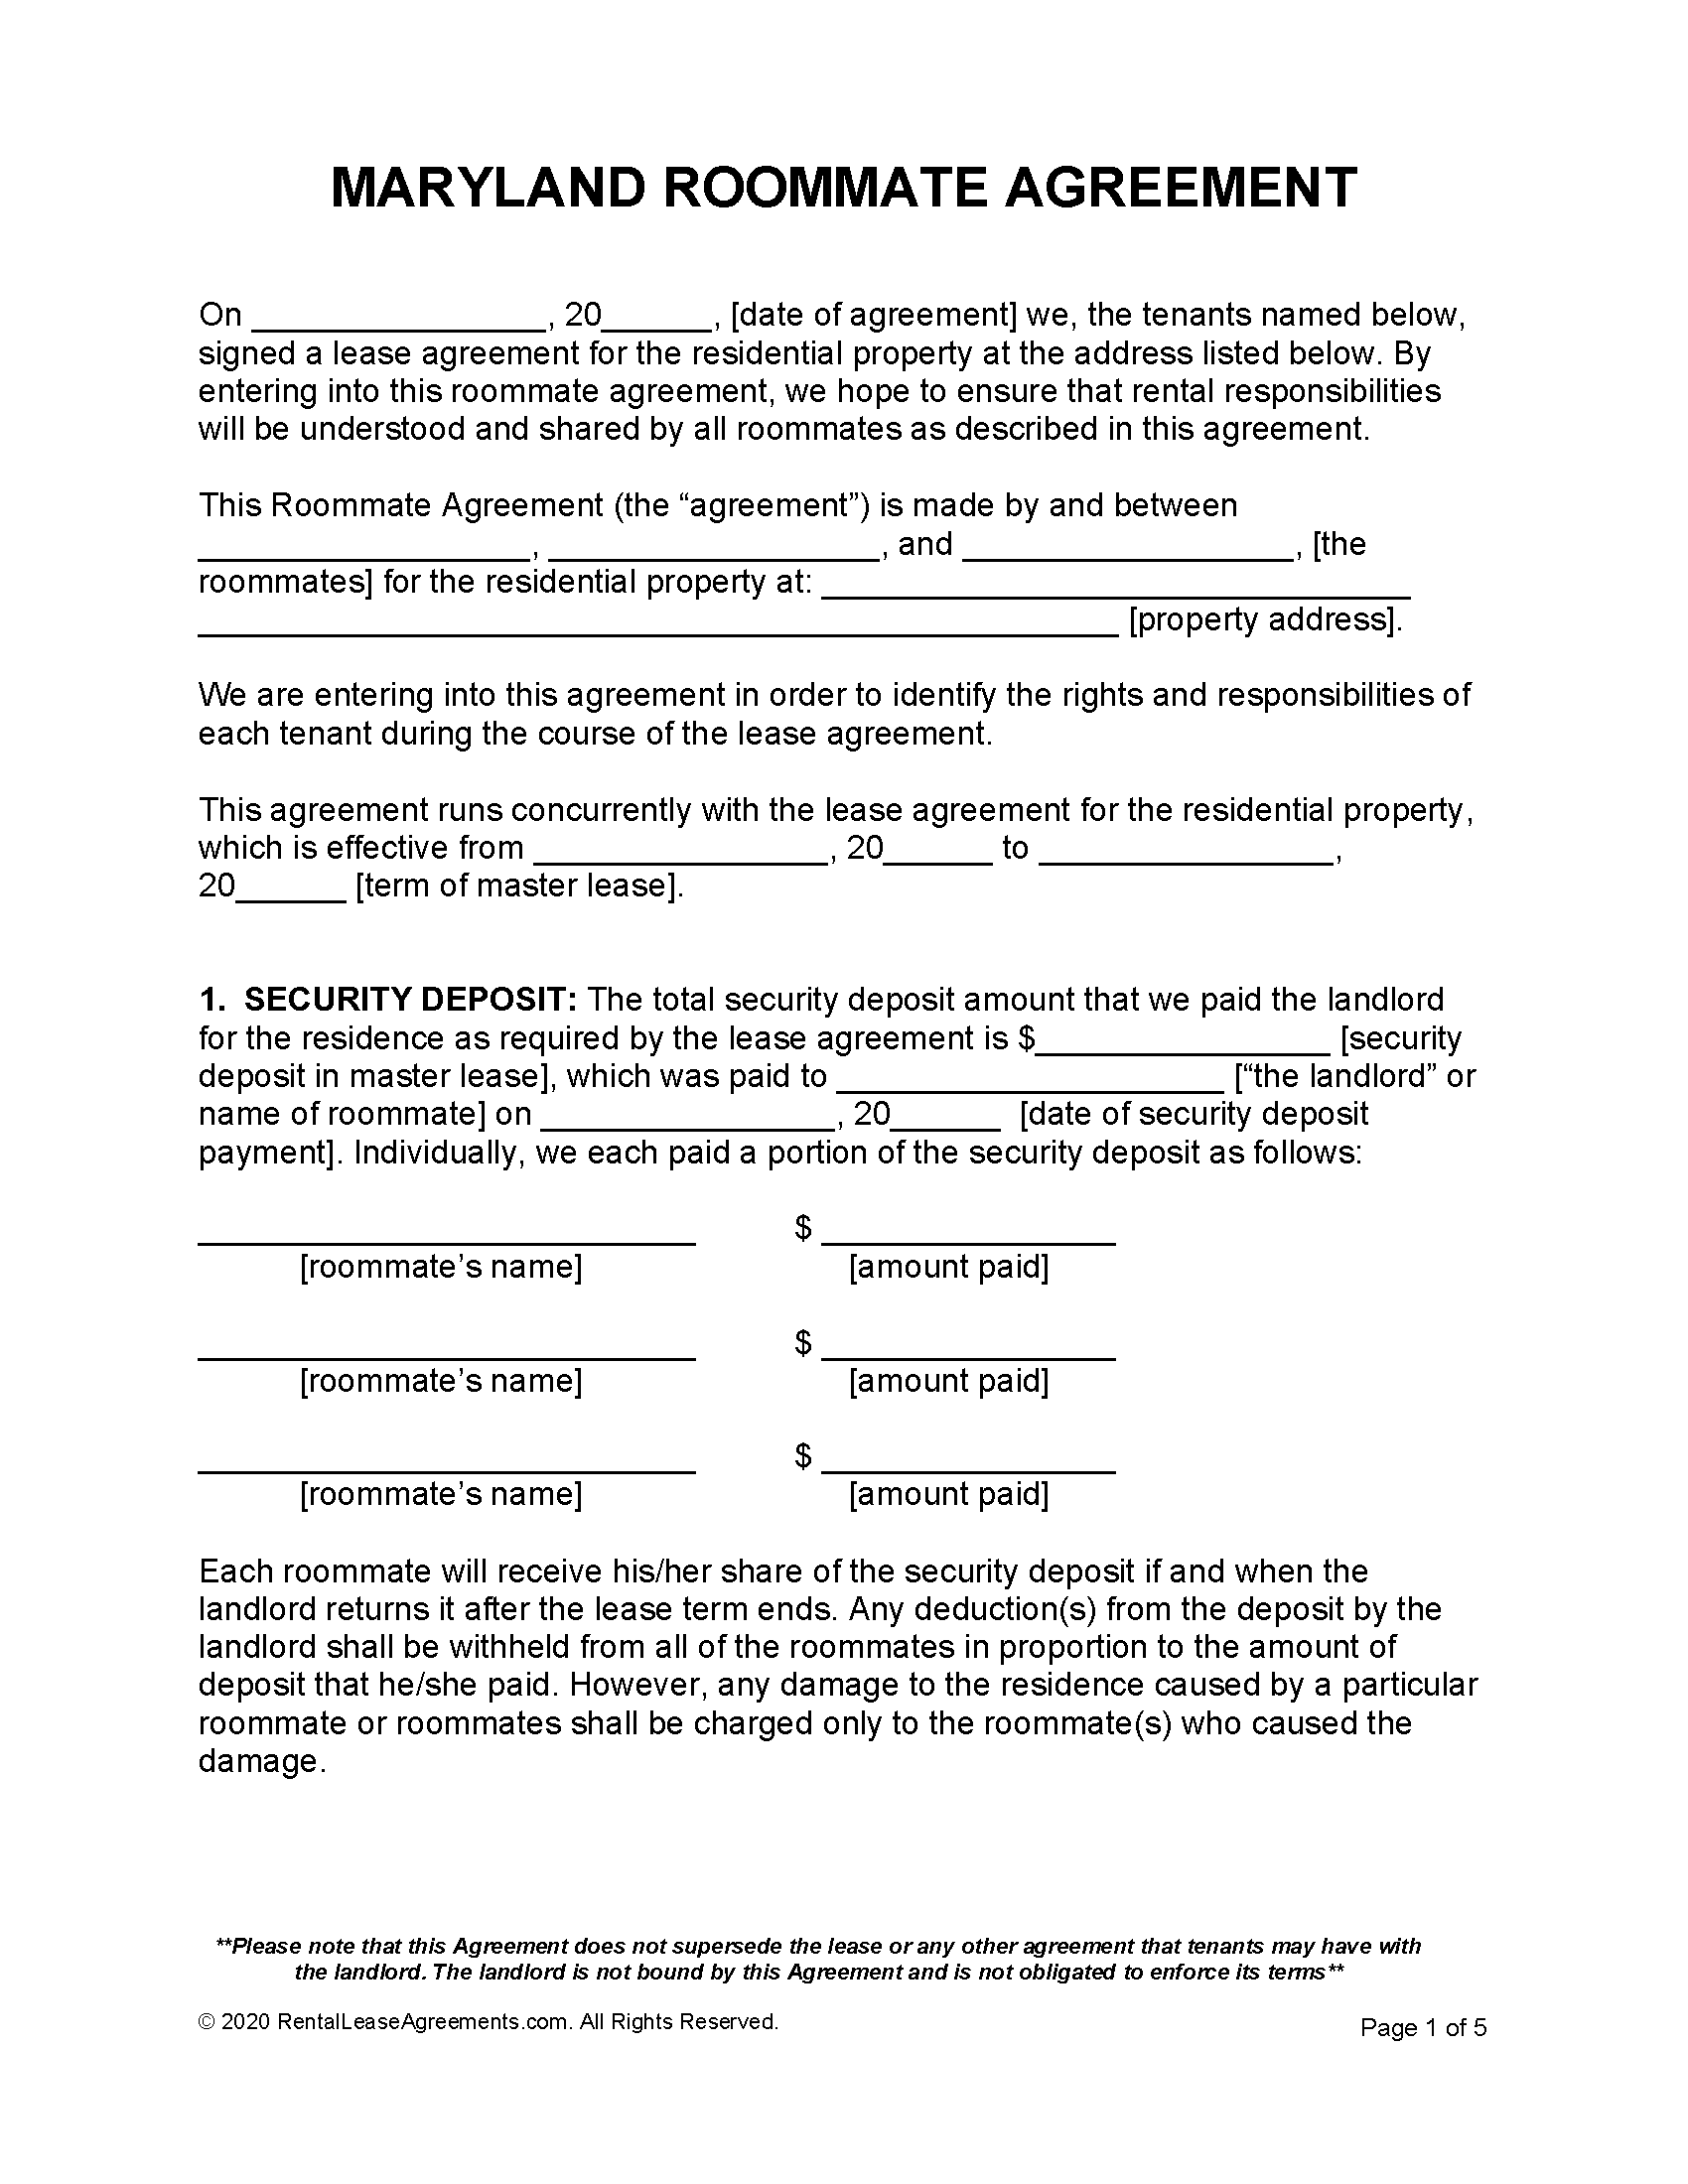 maryland-roommate-agreement-pdf-ms-word-free-printable-rental-lease-agreement-templates